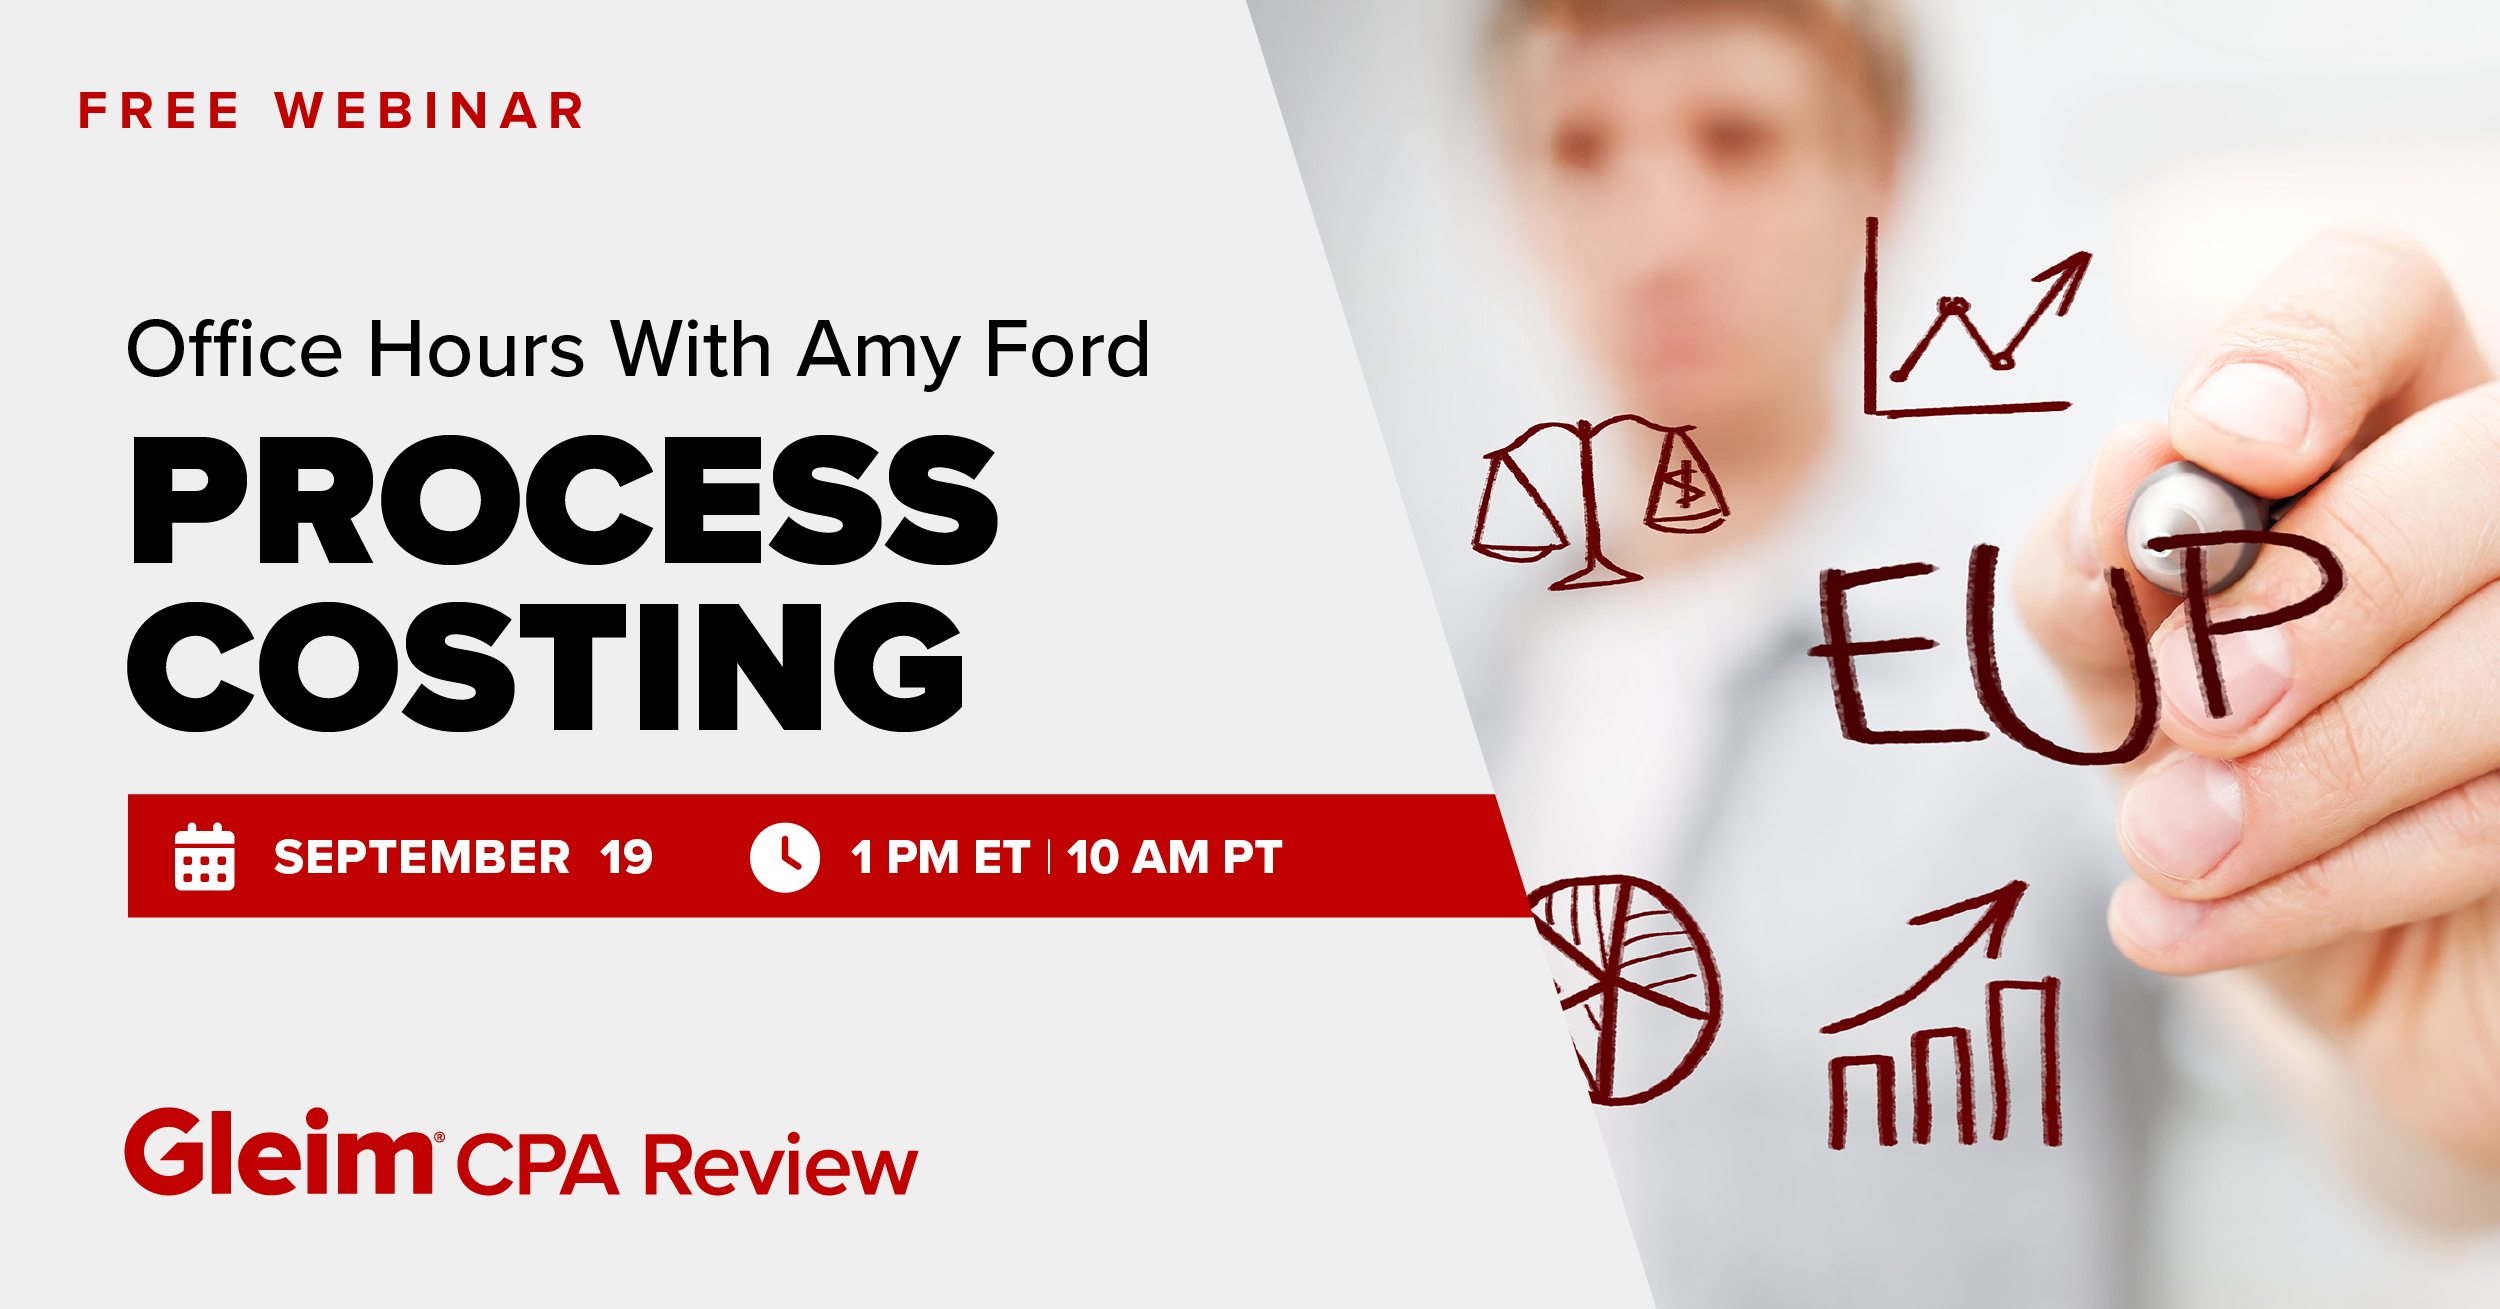 Free Webinar | Office Hours With Amy Ford | Process Costing | September 19th | 1 PM ET, 10 AM PT | Gleim CPA Review